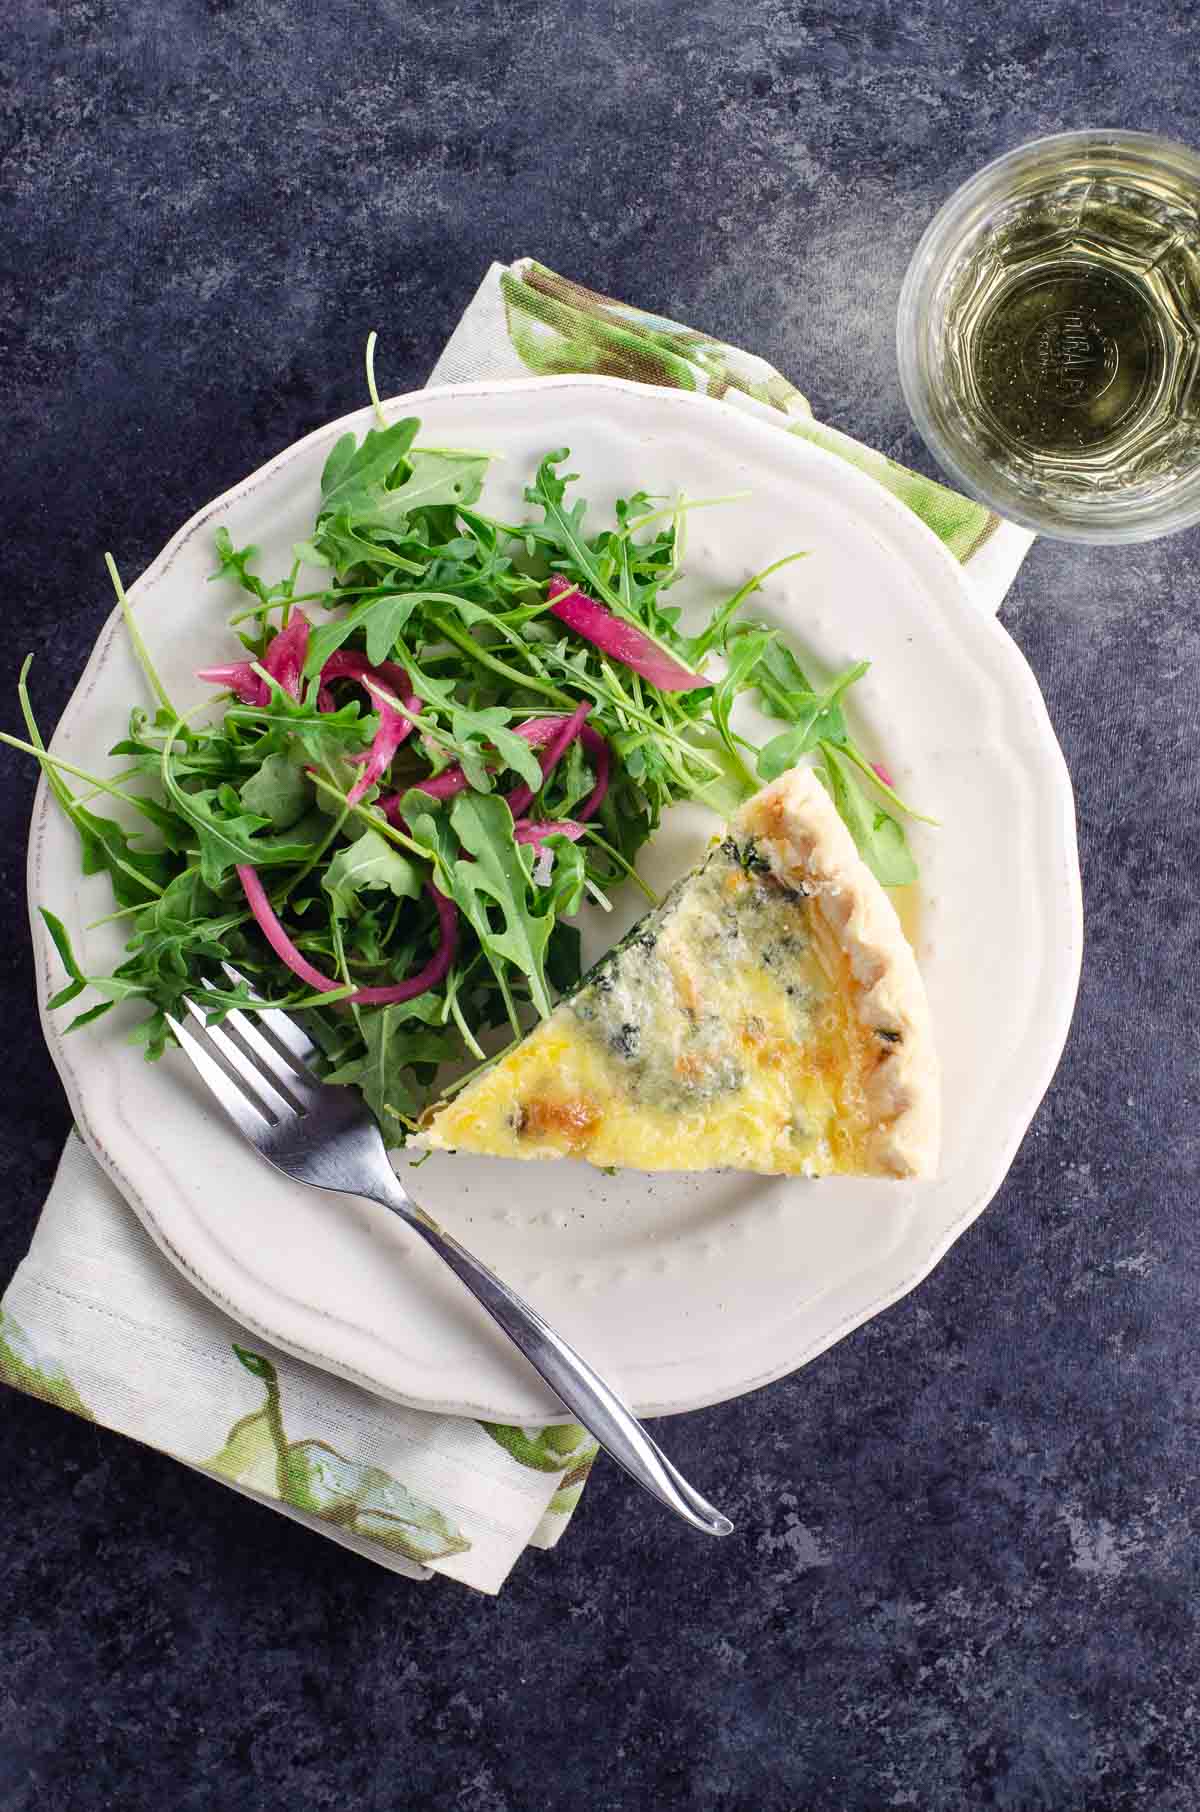 a slice of Quiche Florentine and salad on a plate, and a glass of white wine